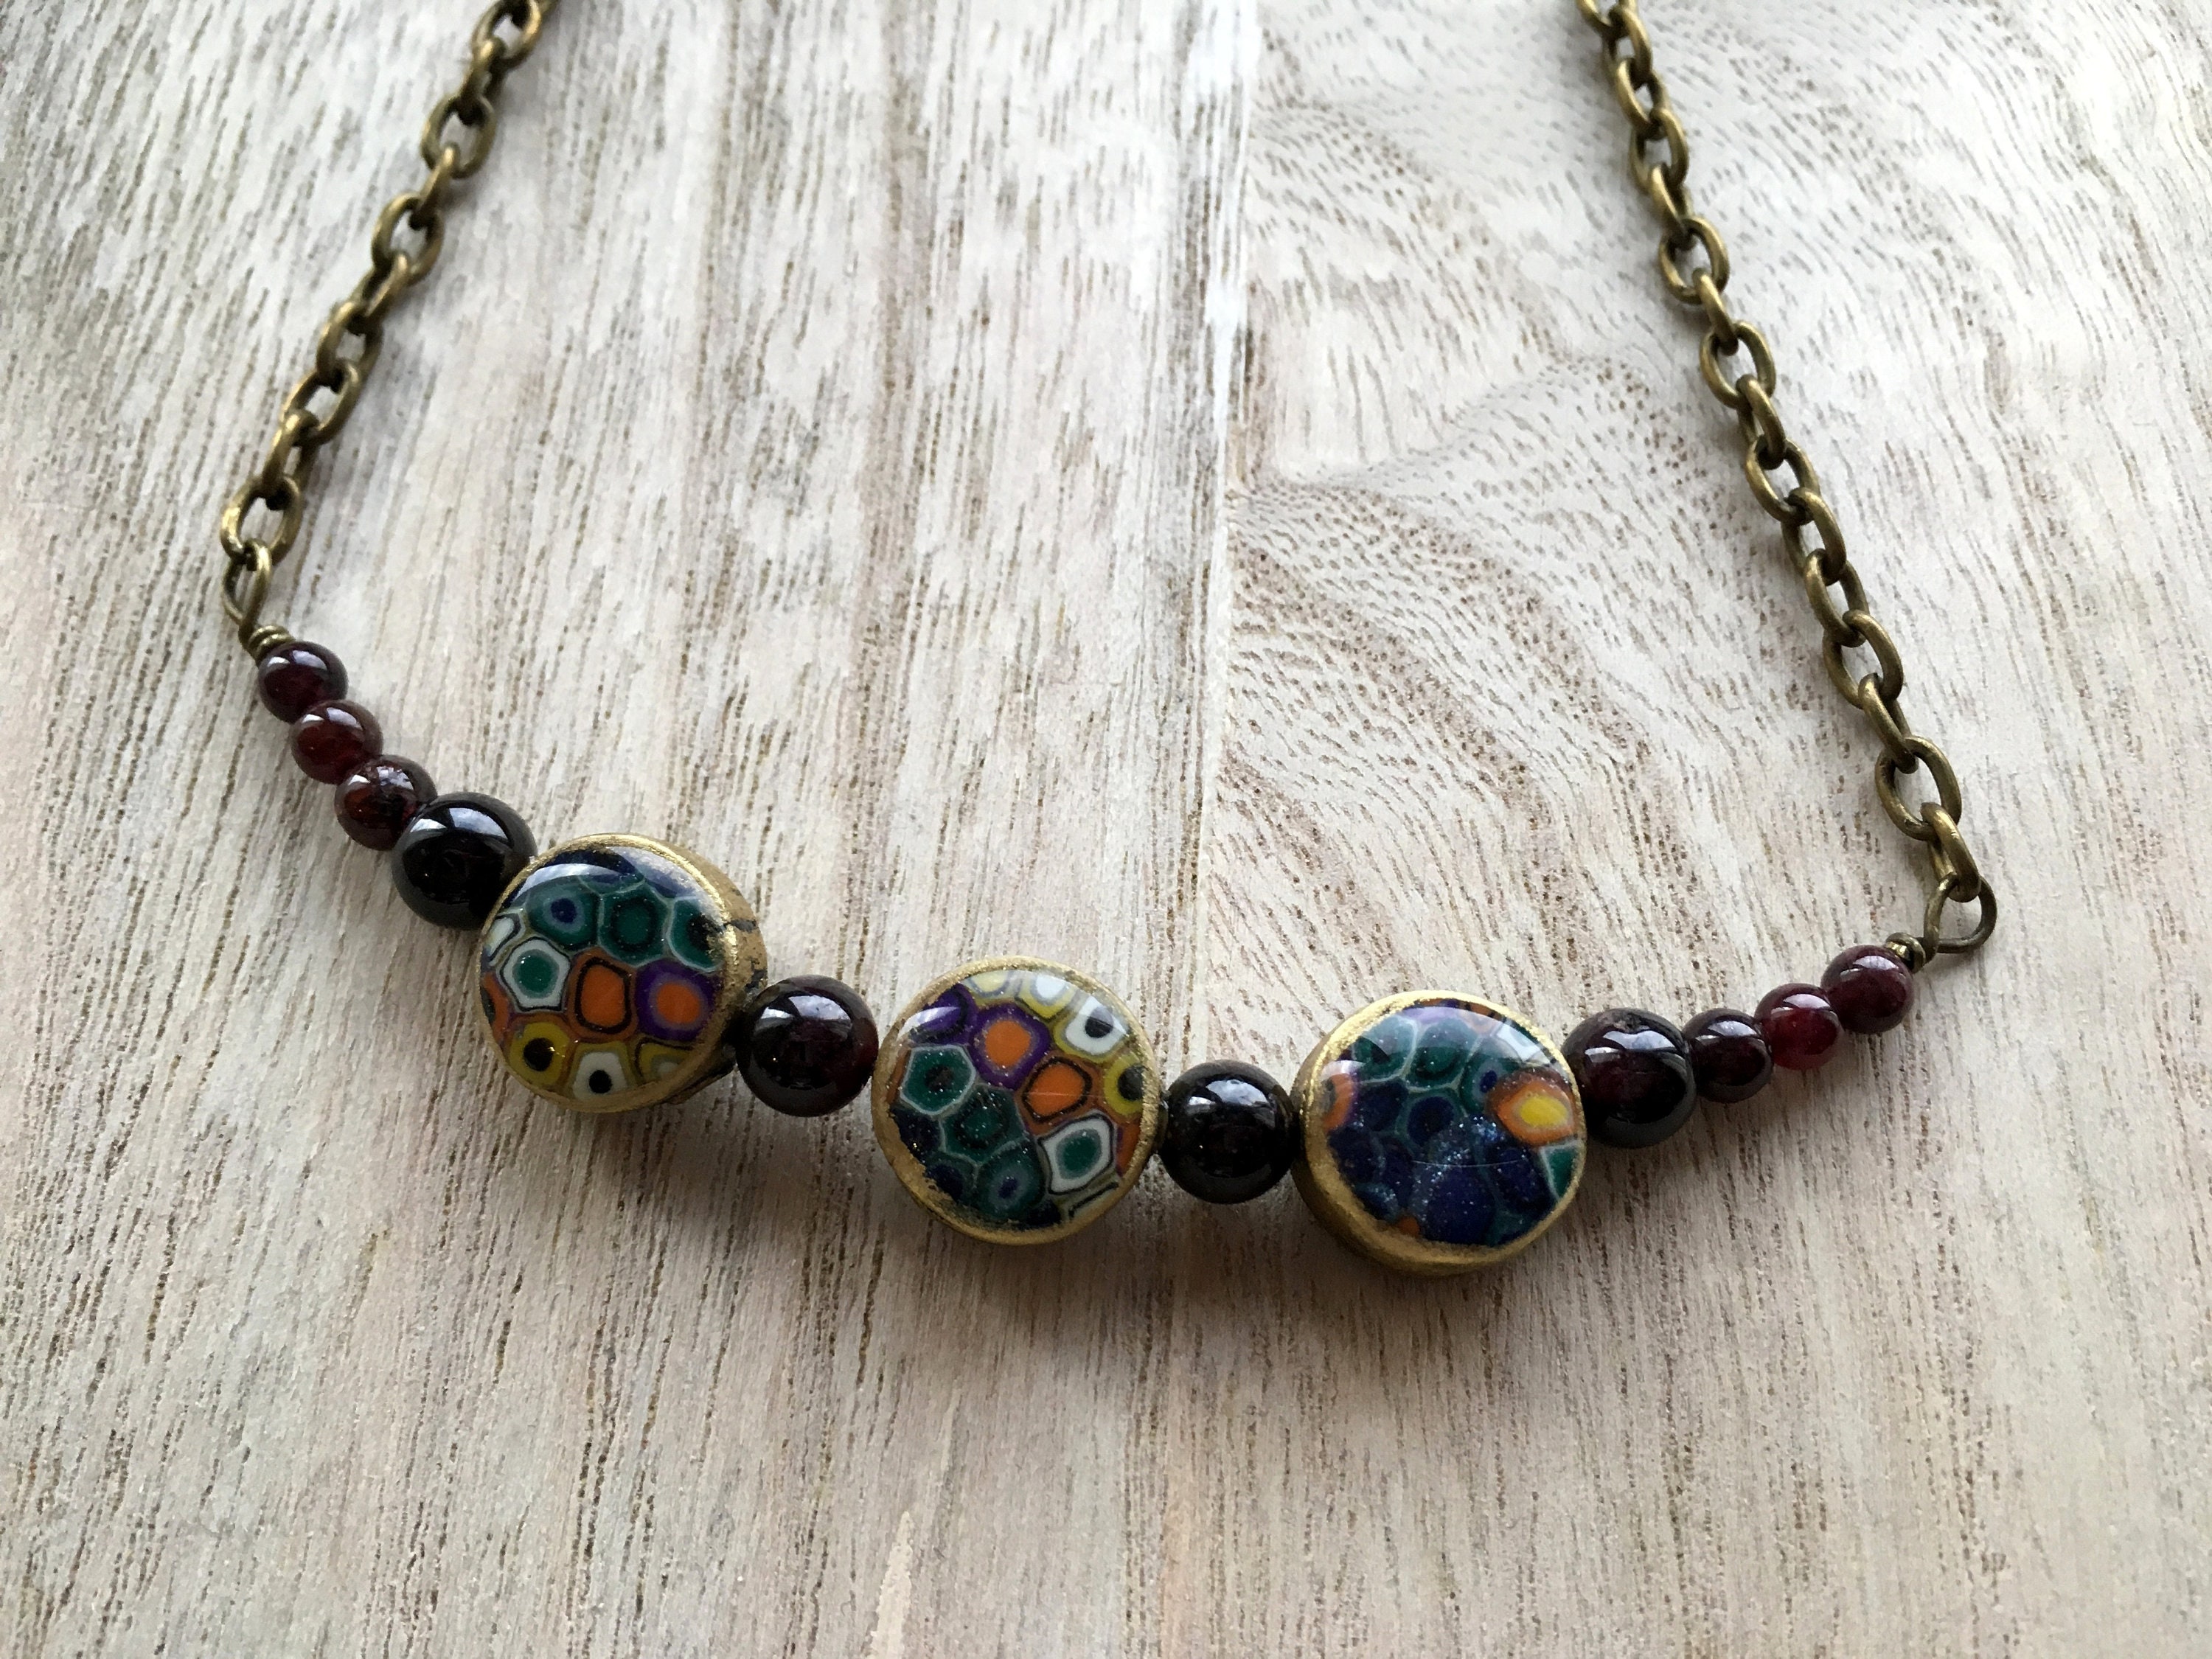 Charm Necklace Multicolored With Real Garnet Stone Romantic | Etsy